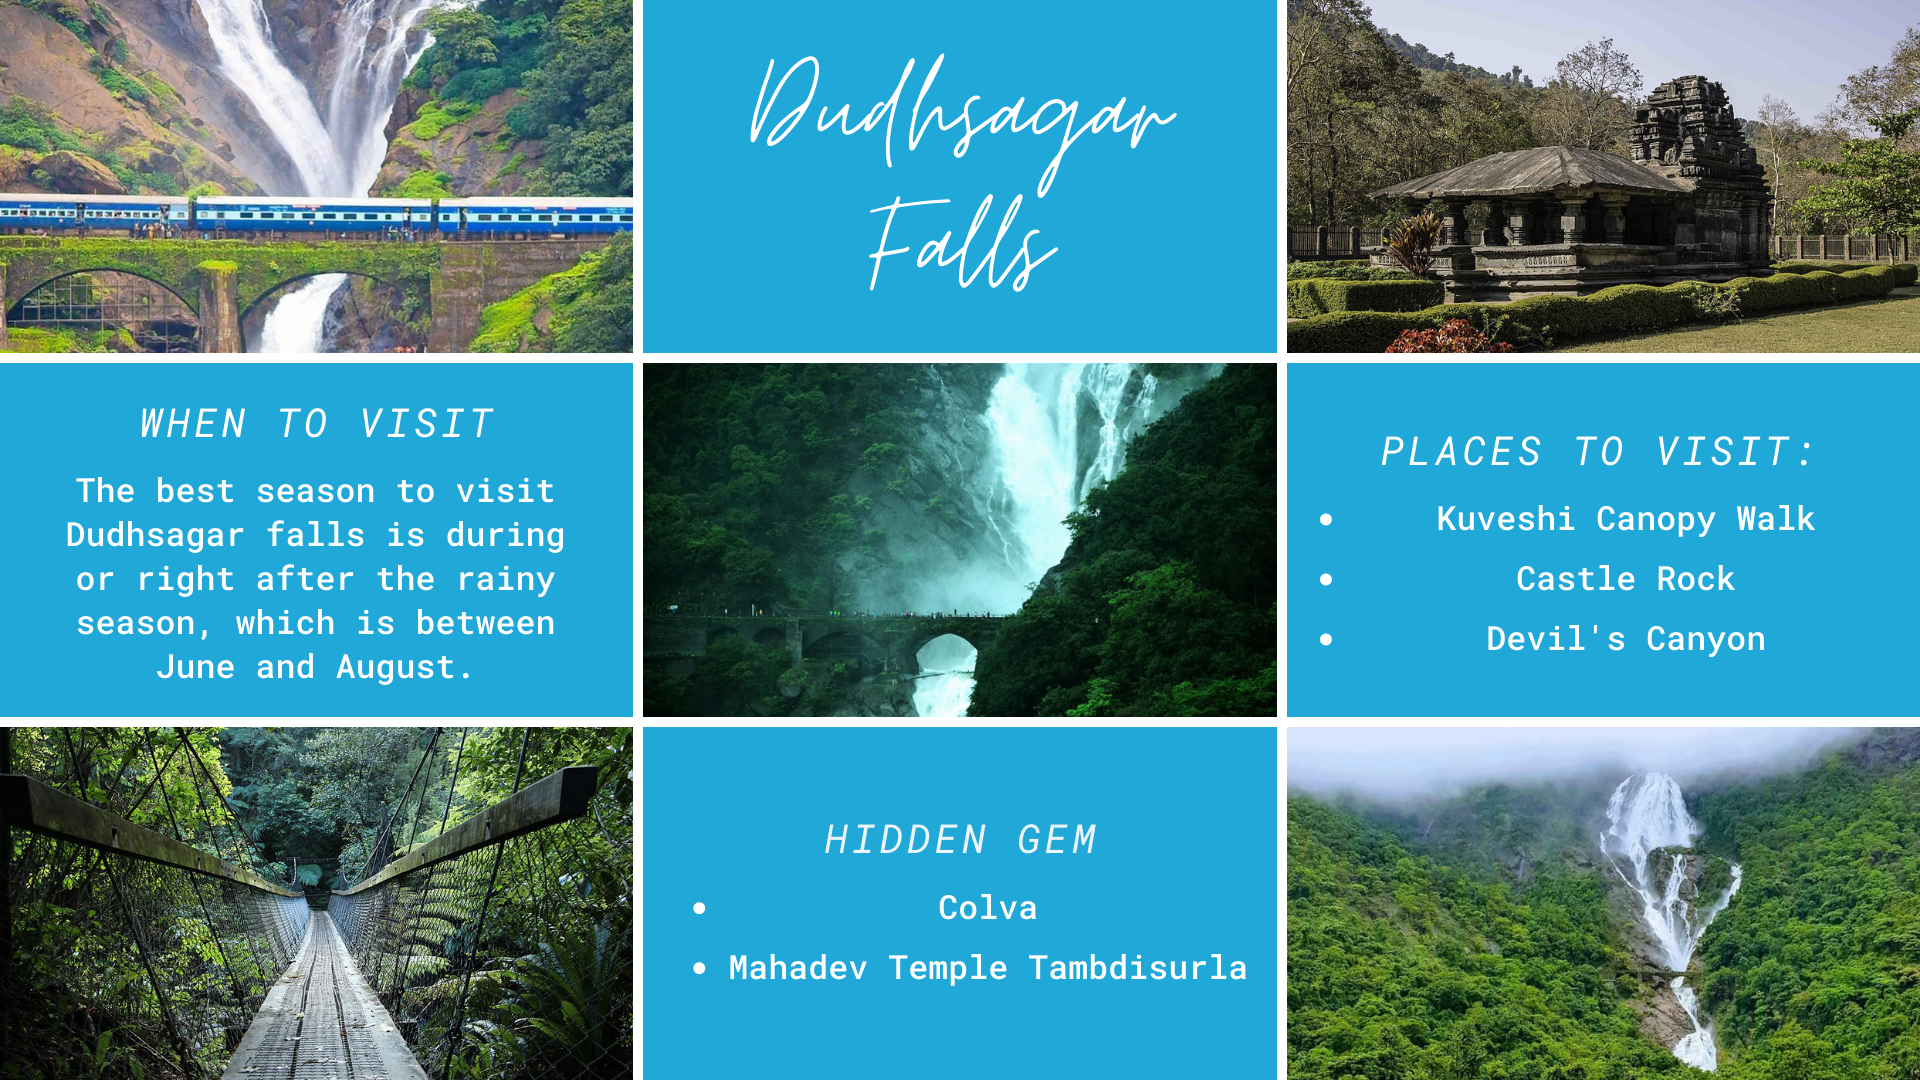 Top Things to Do in Dudhsagar Falls for a Memorable Trip!